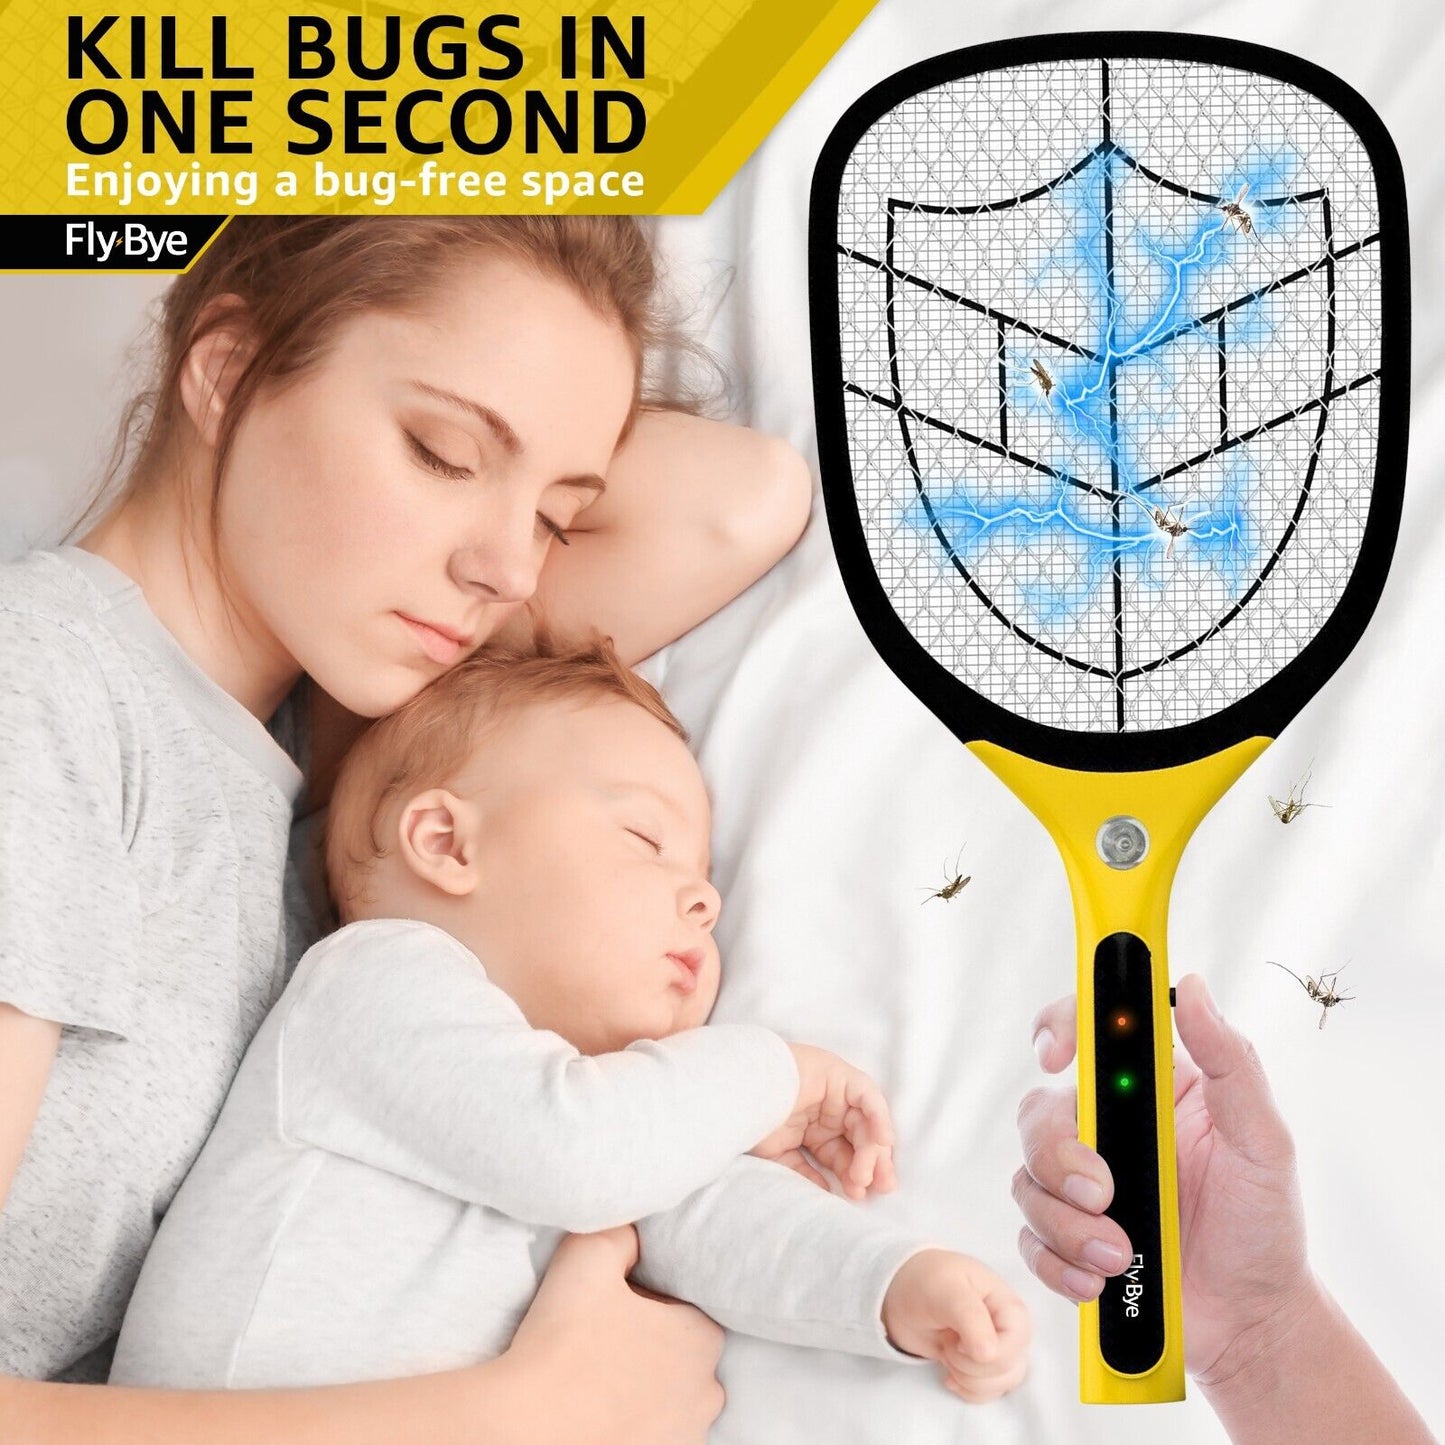 Electric Fly Killer Bug Zapper Racket Mosquito Insect Pest Swatter Wasp Trap Bat